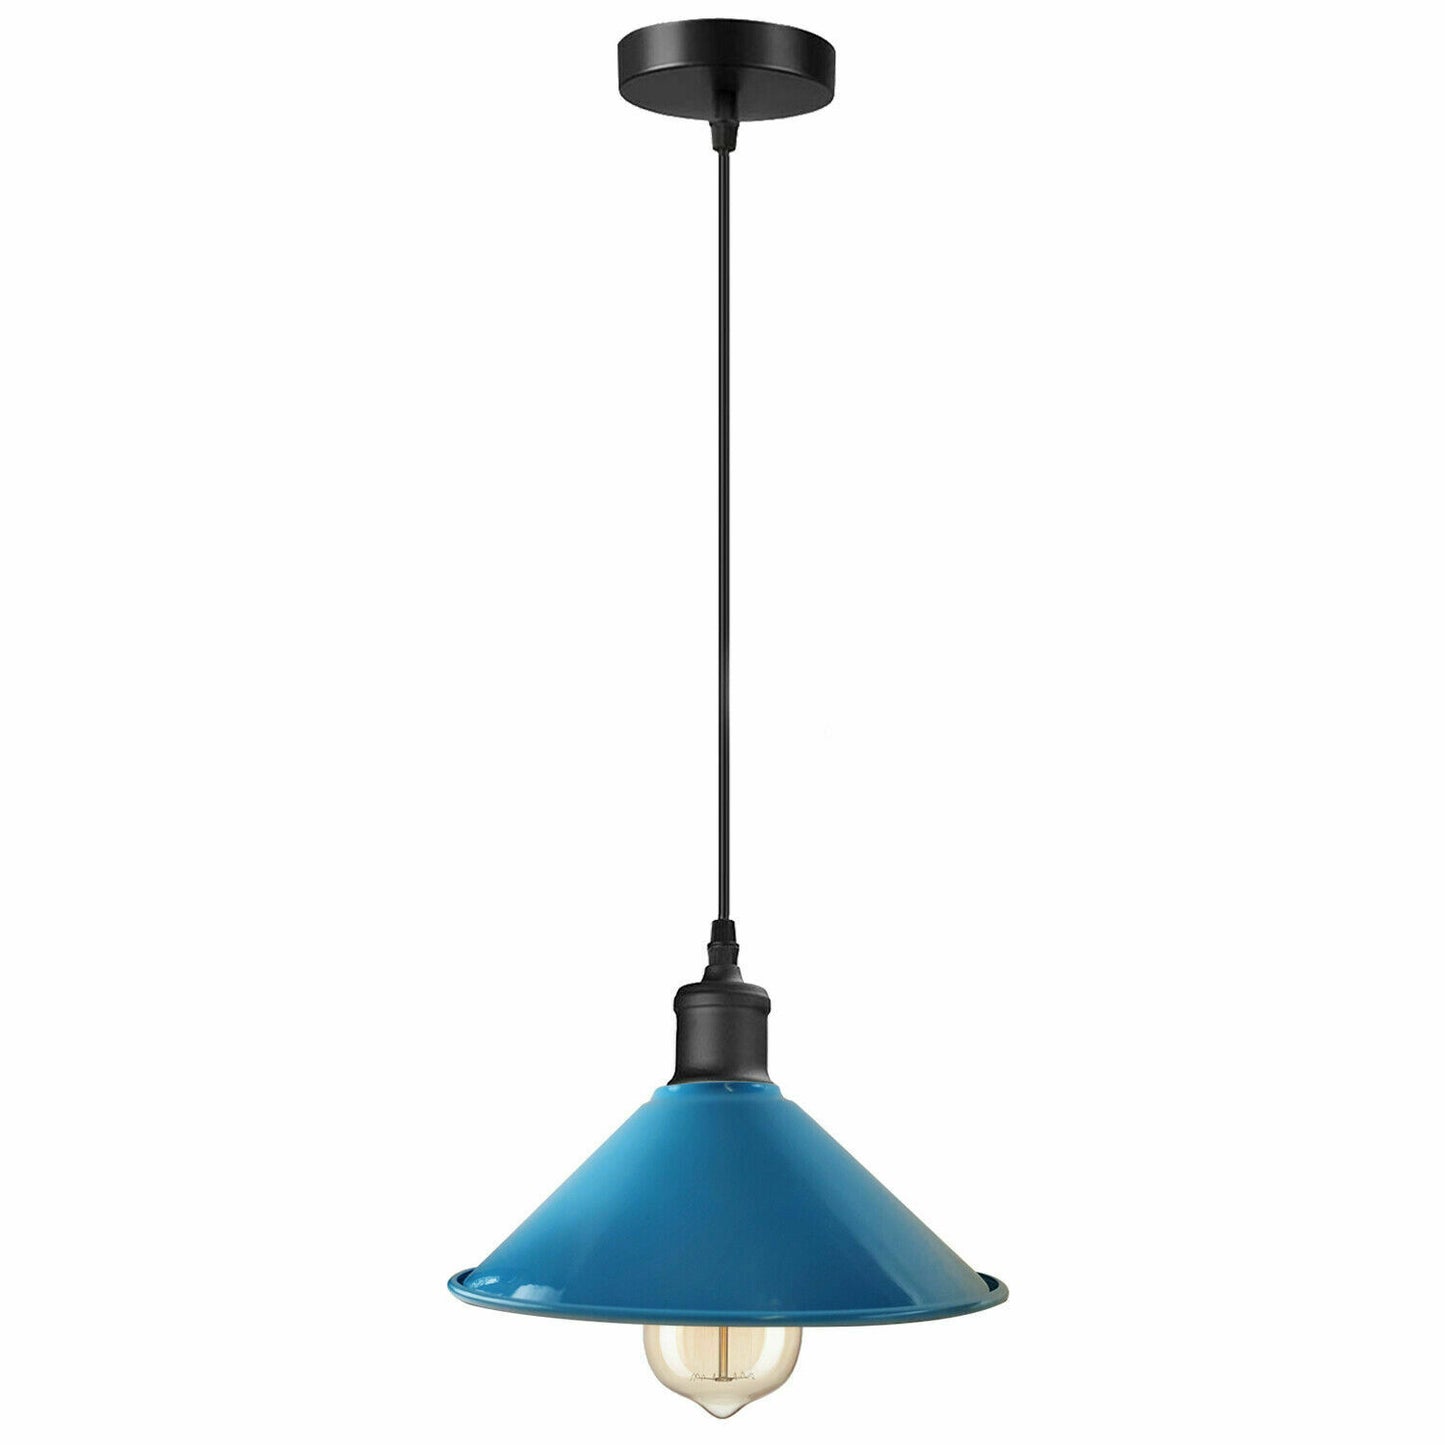 45 Inch Industrial Modern Cone Ceiling Pendant Lighting